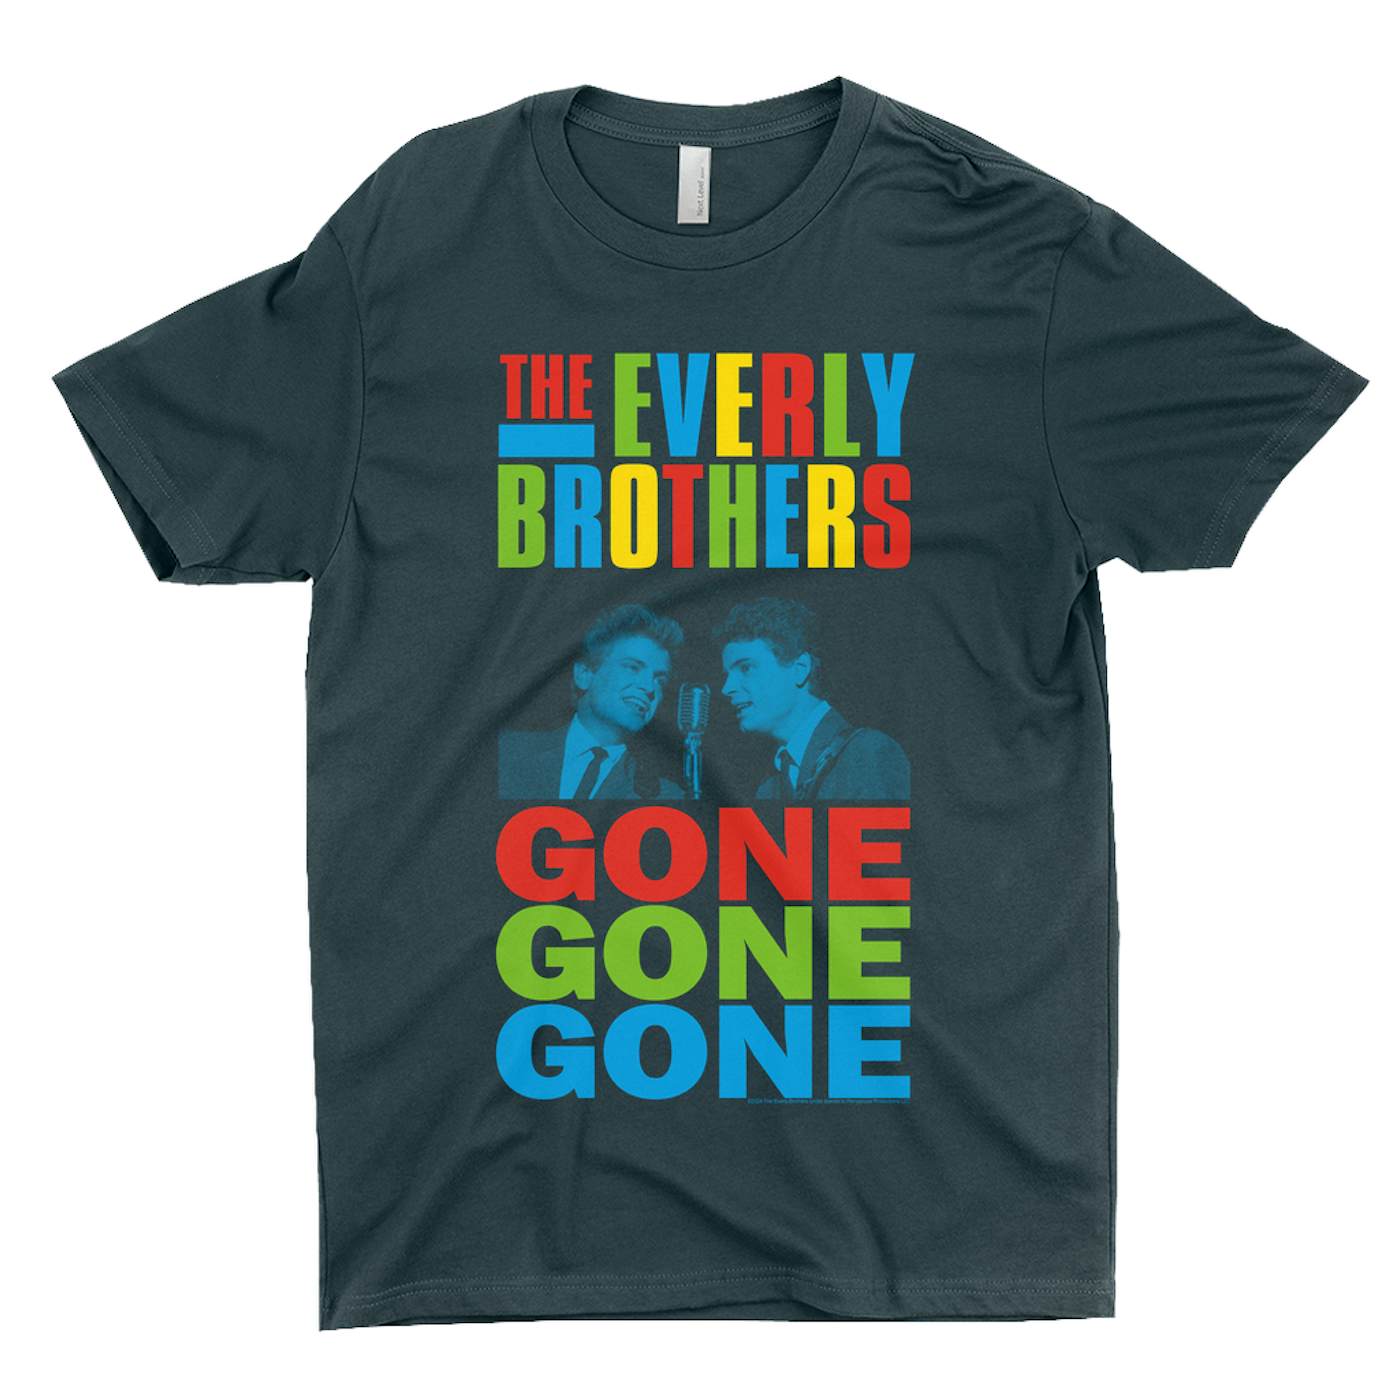 The Everly Brothers T-Shirt | Gone, Gone, Gone Colorful The Everly Brothers Shirt